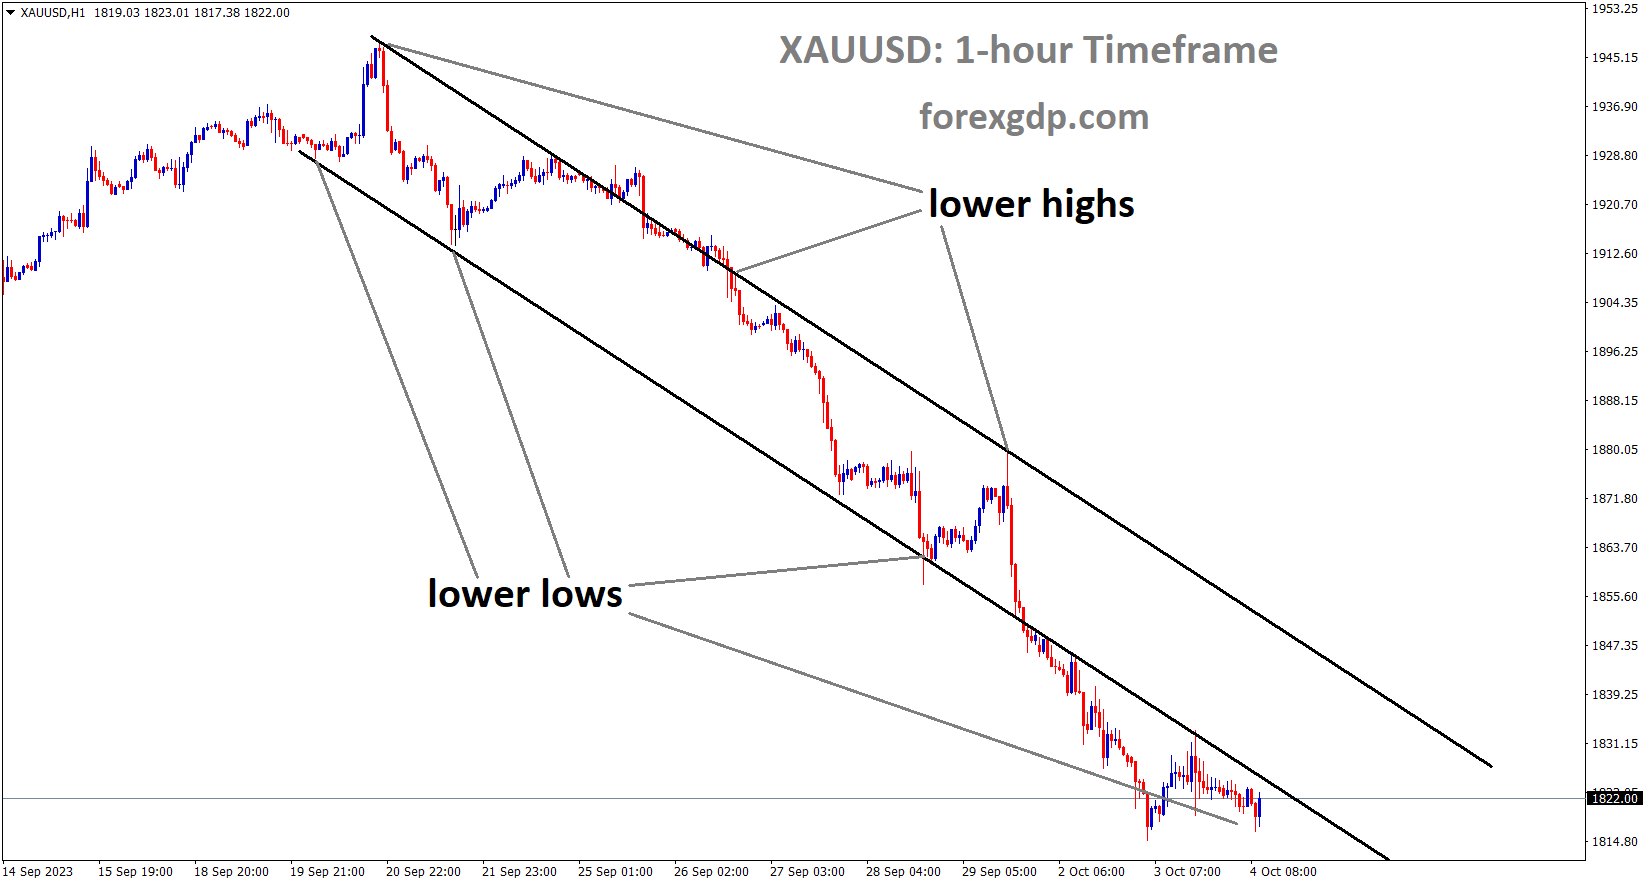 XAUUSD Gold price is moving in the Descending channel and the market has reached the lower low area of the channel